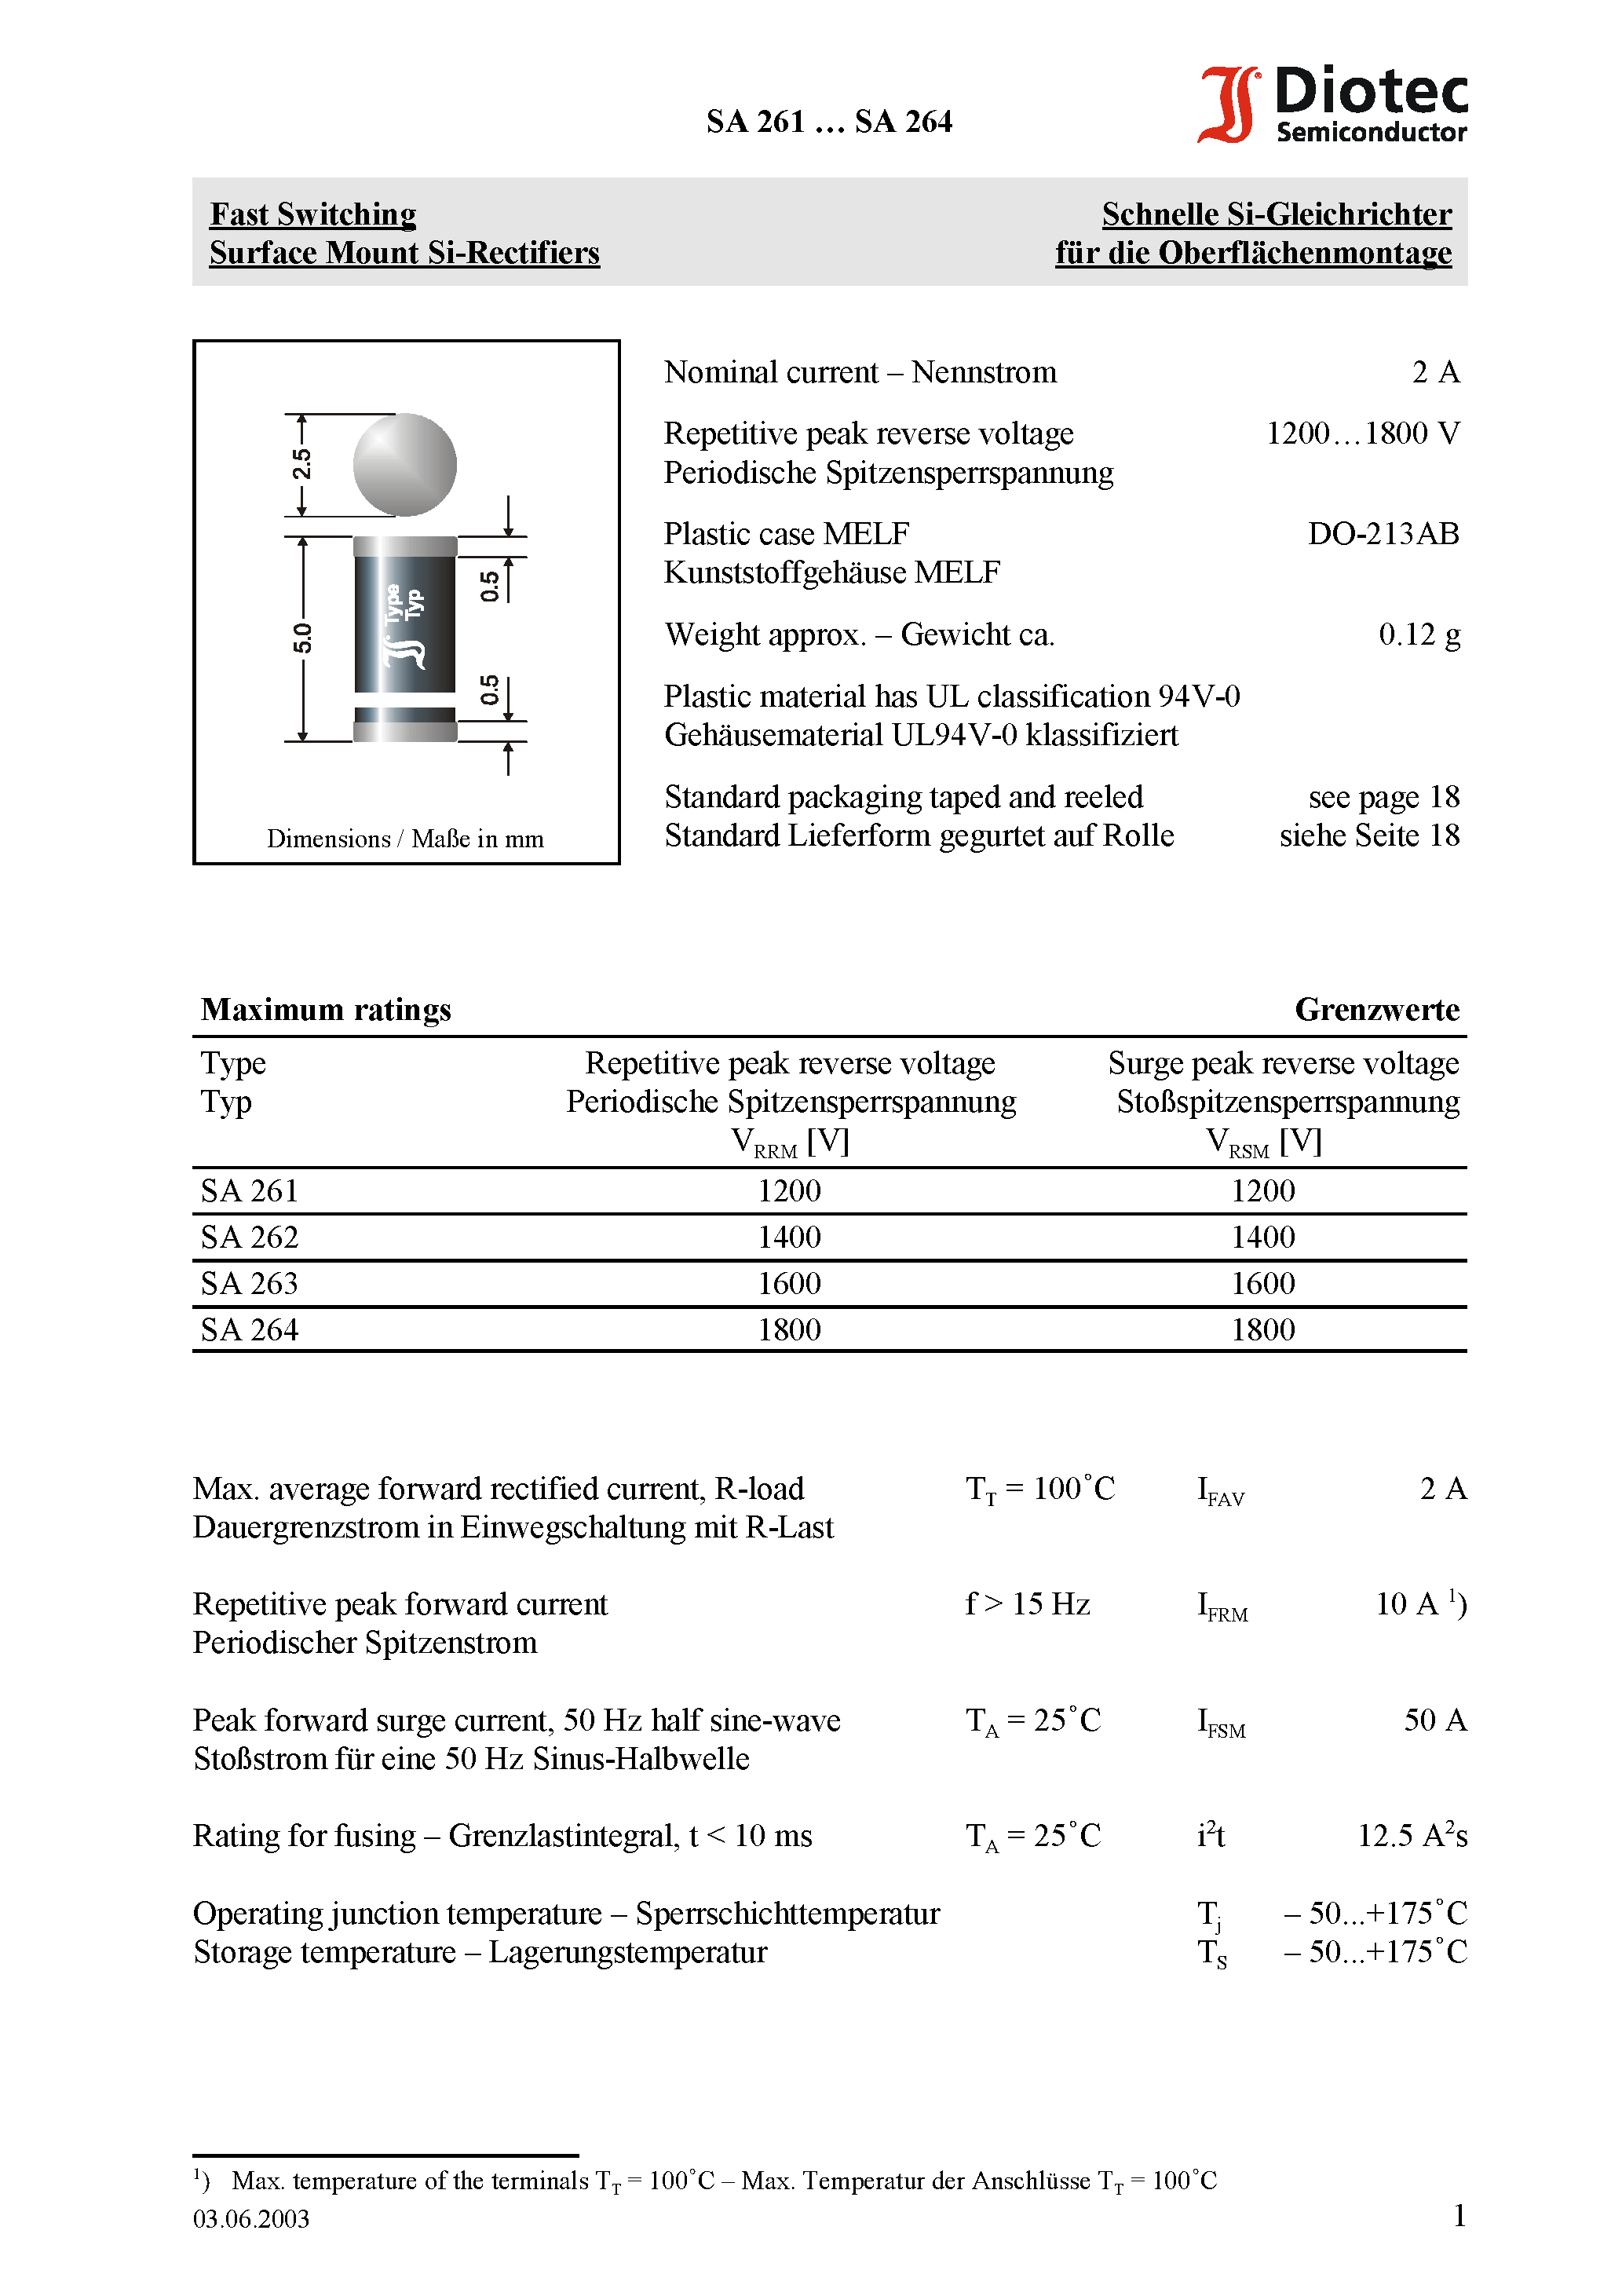 Datasheet SA264 - Fast Switching Surface Mount Si-Rectifiers page 1